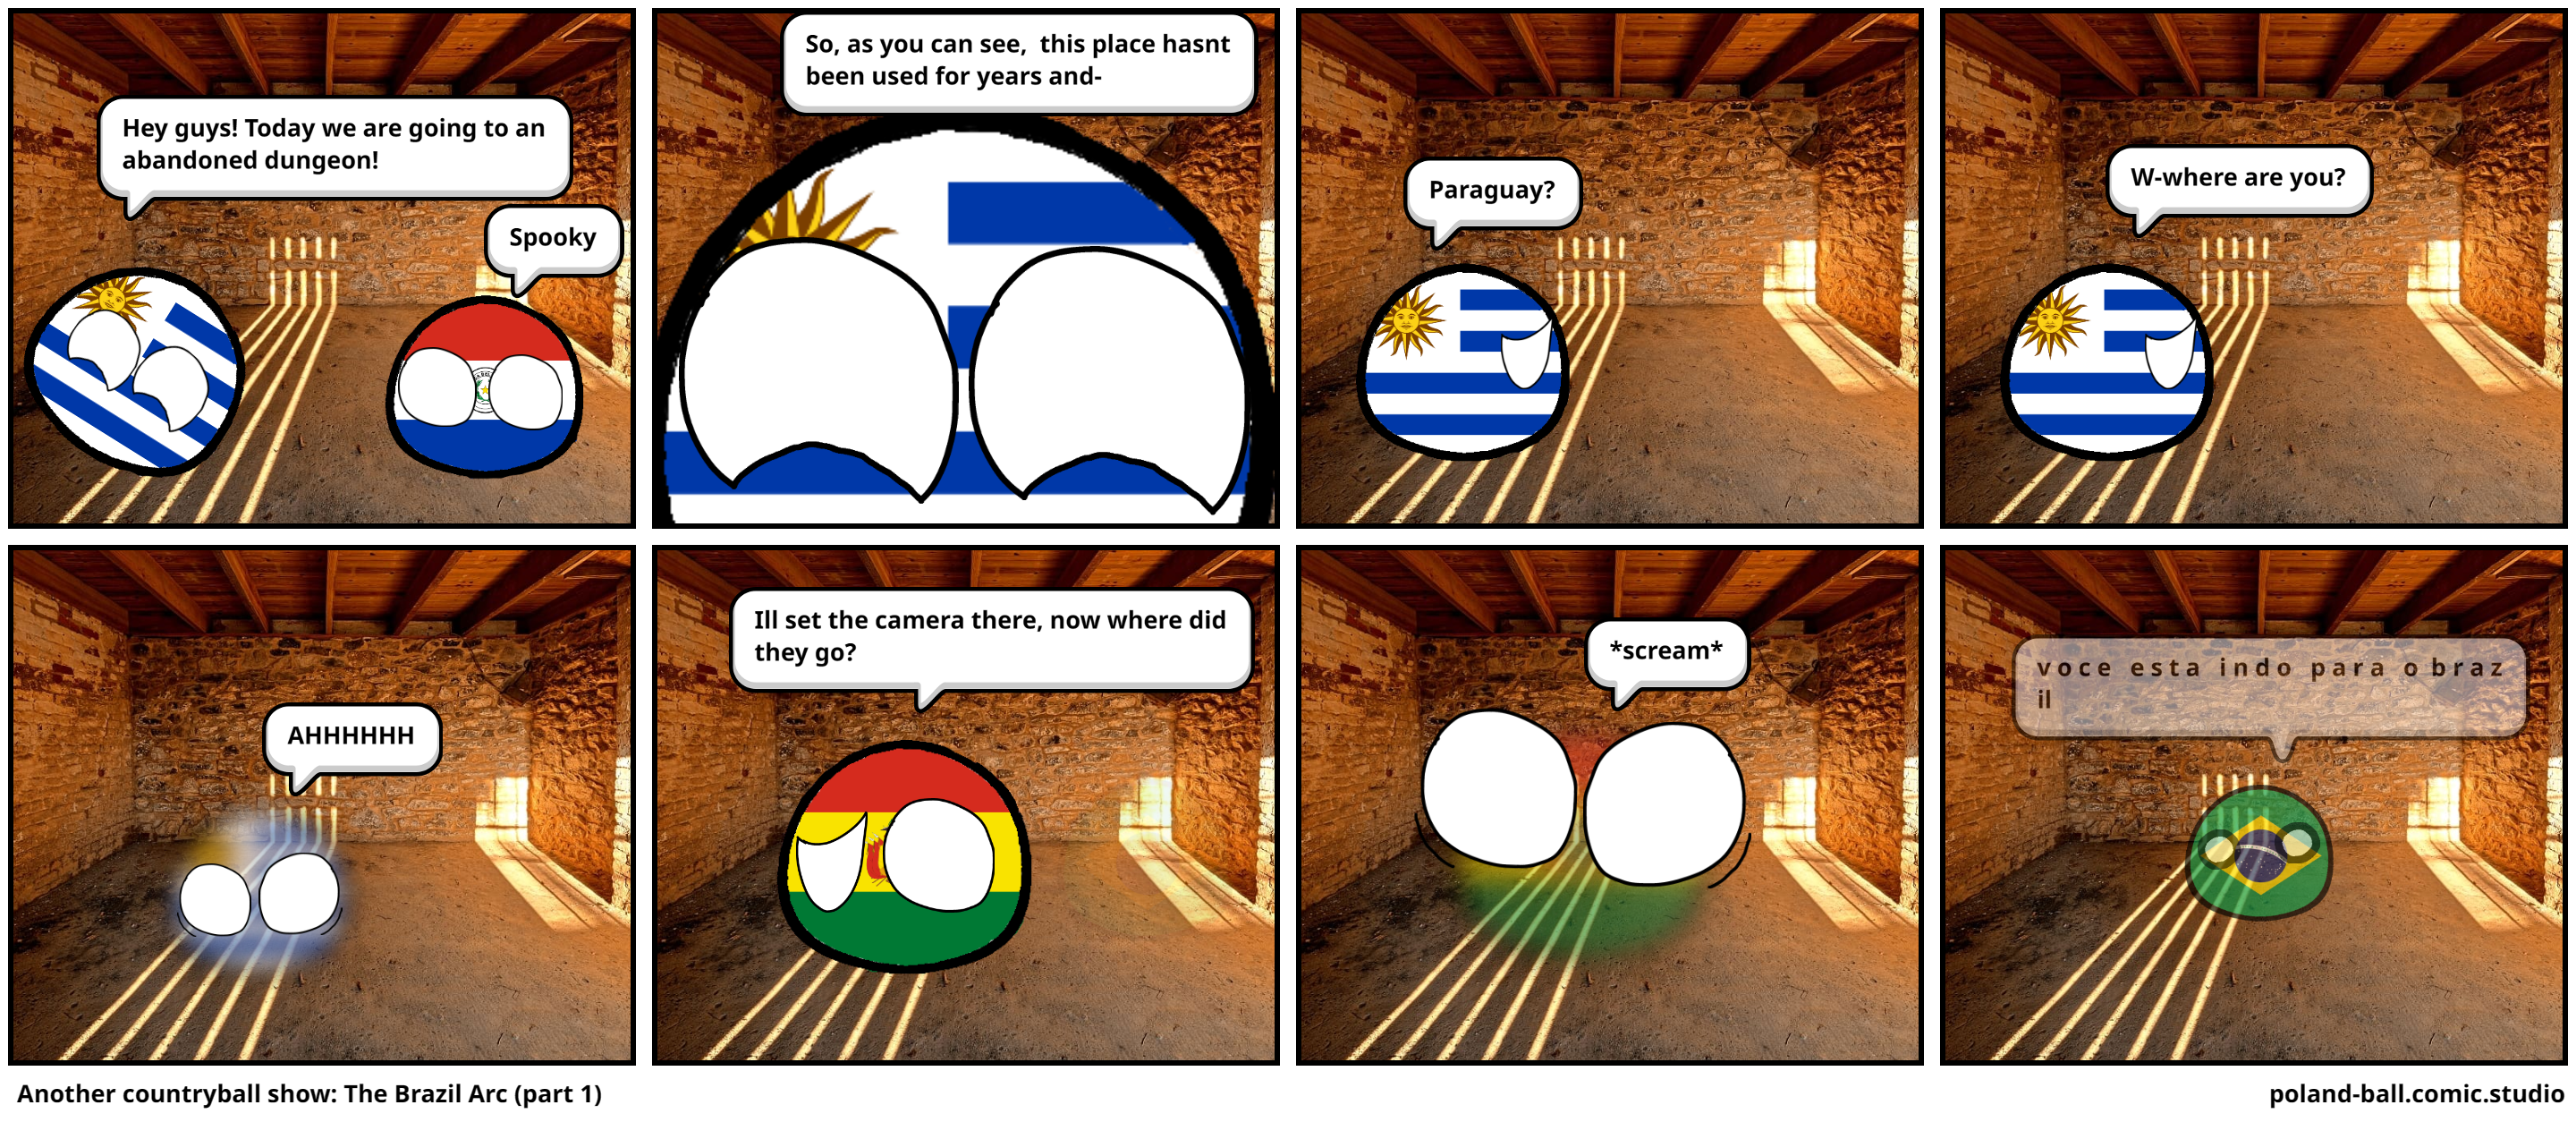  Another countryball show: The Brazil Arc (part 1)